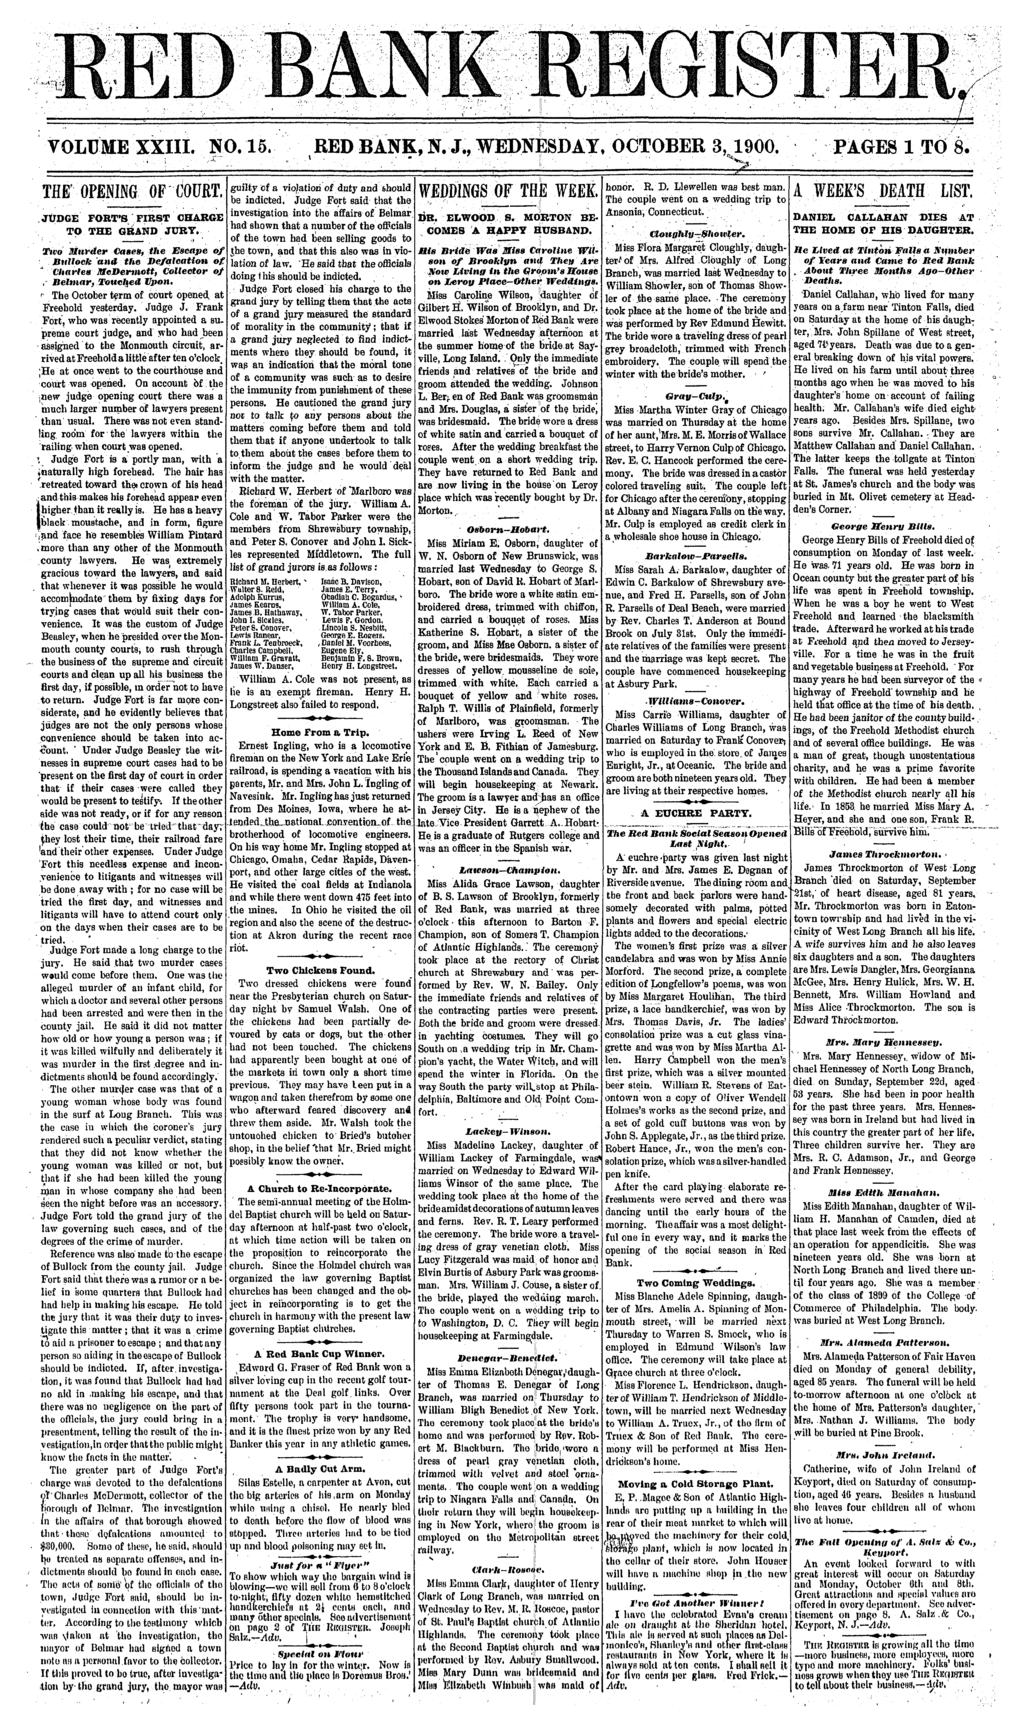 ANK VOLUME XX. NO. 15. RED BANK, N.J*, WEDNESDAY, OCTOBER 3, 1900. PAGES 1 TO 8. THE OPENNG OF COURT.. JUDGE FORTS FRST CHARGE TO THE GRAND JURY.